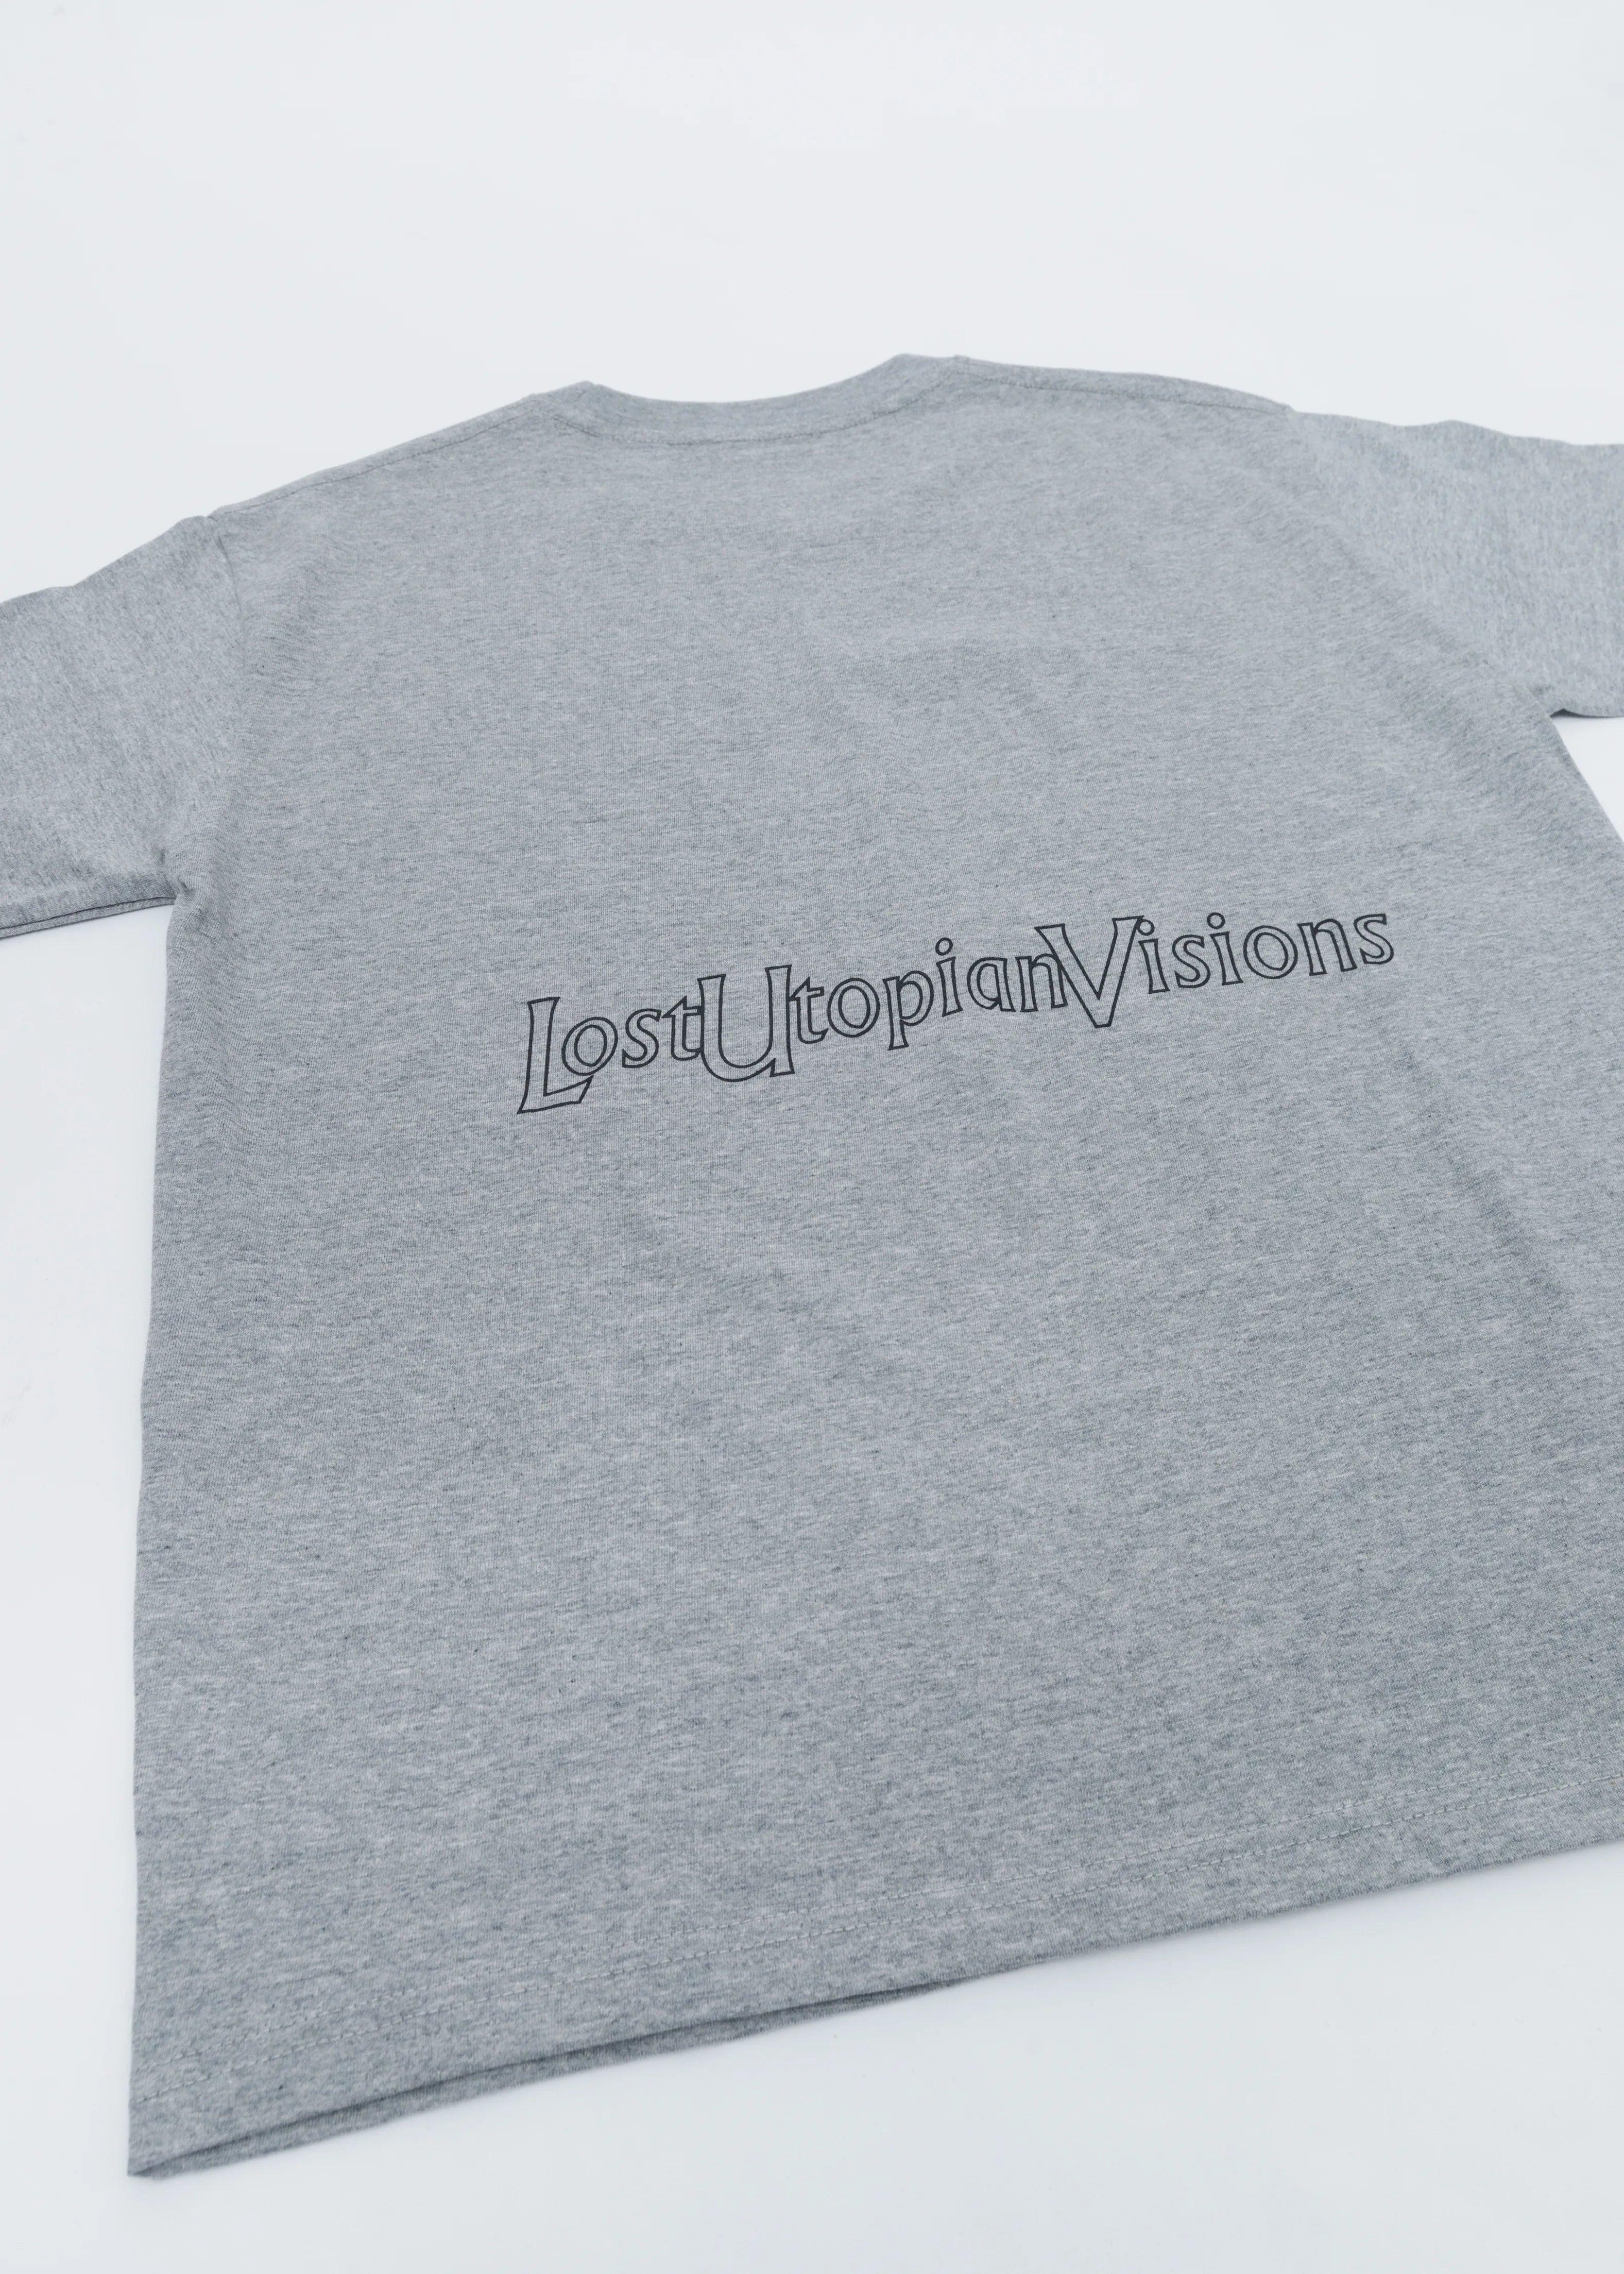 Lost Utopian Visions LUV Outline logo SS tee - Misty - SUPERCONSCIOUS BERLIN